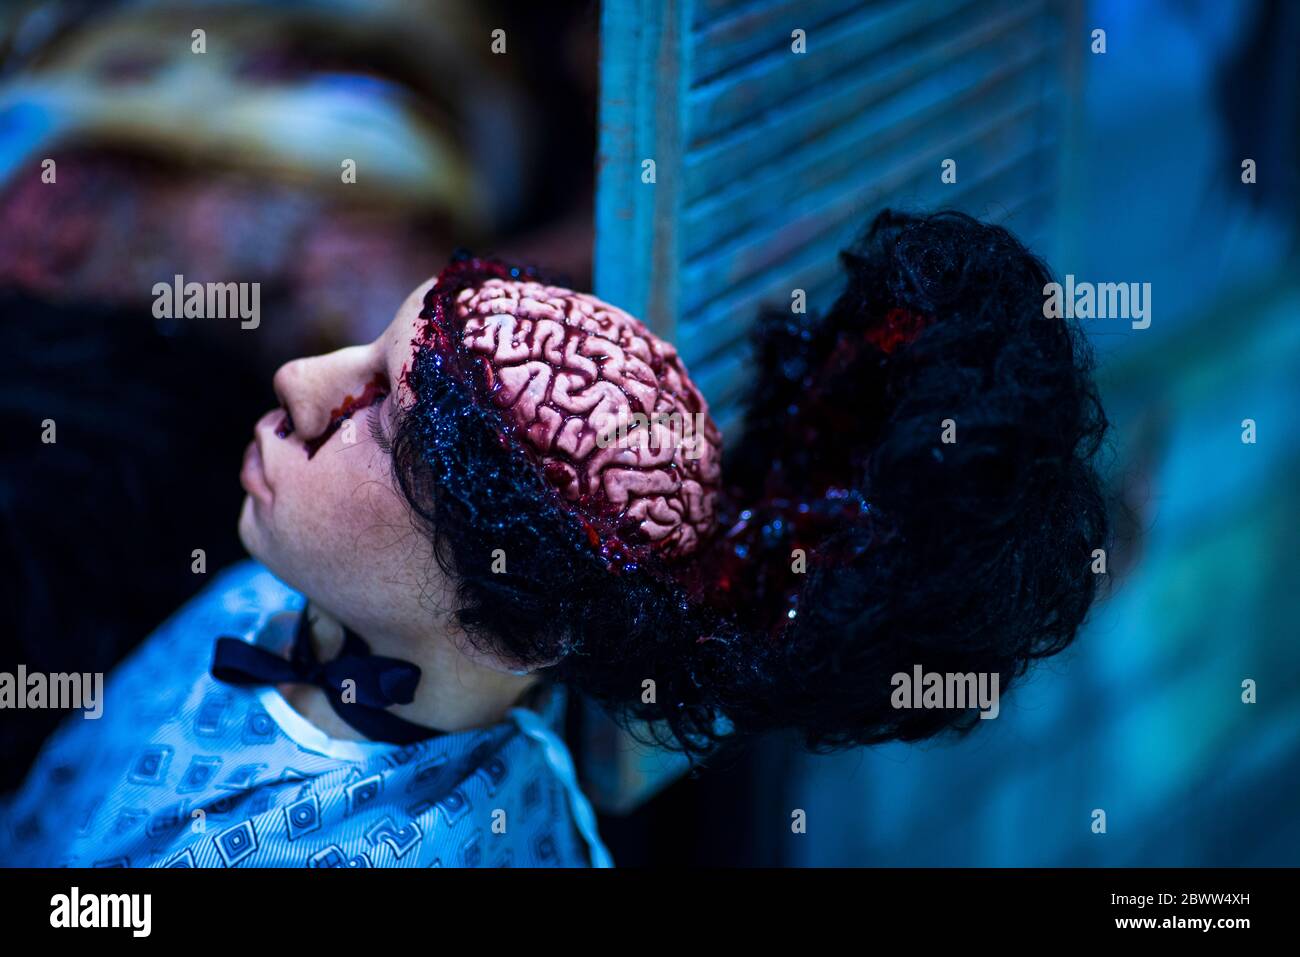 Brain surgery pavilion of fear, House of Horror Stock Photo